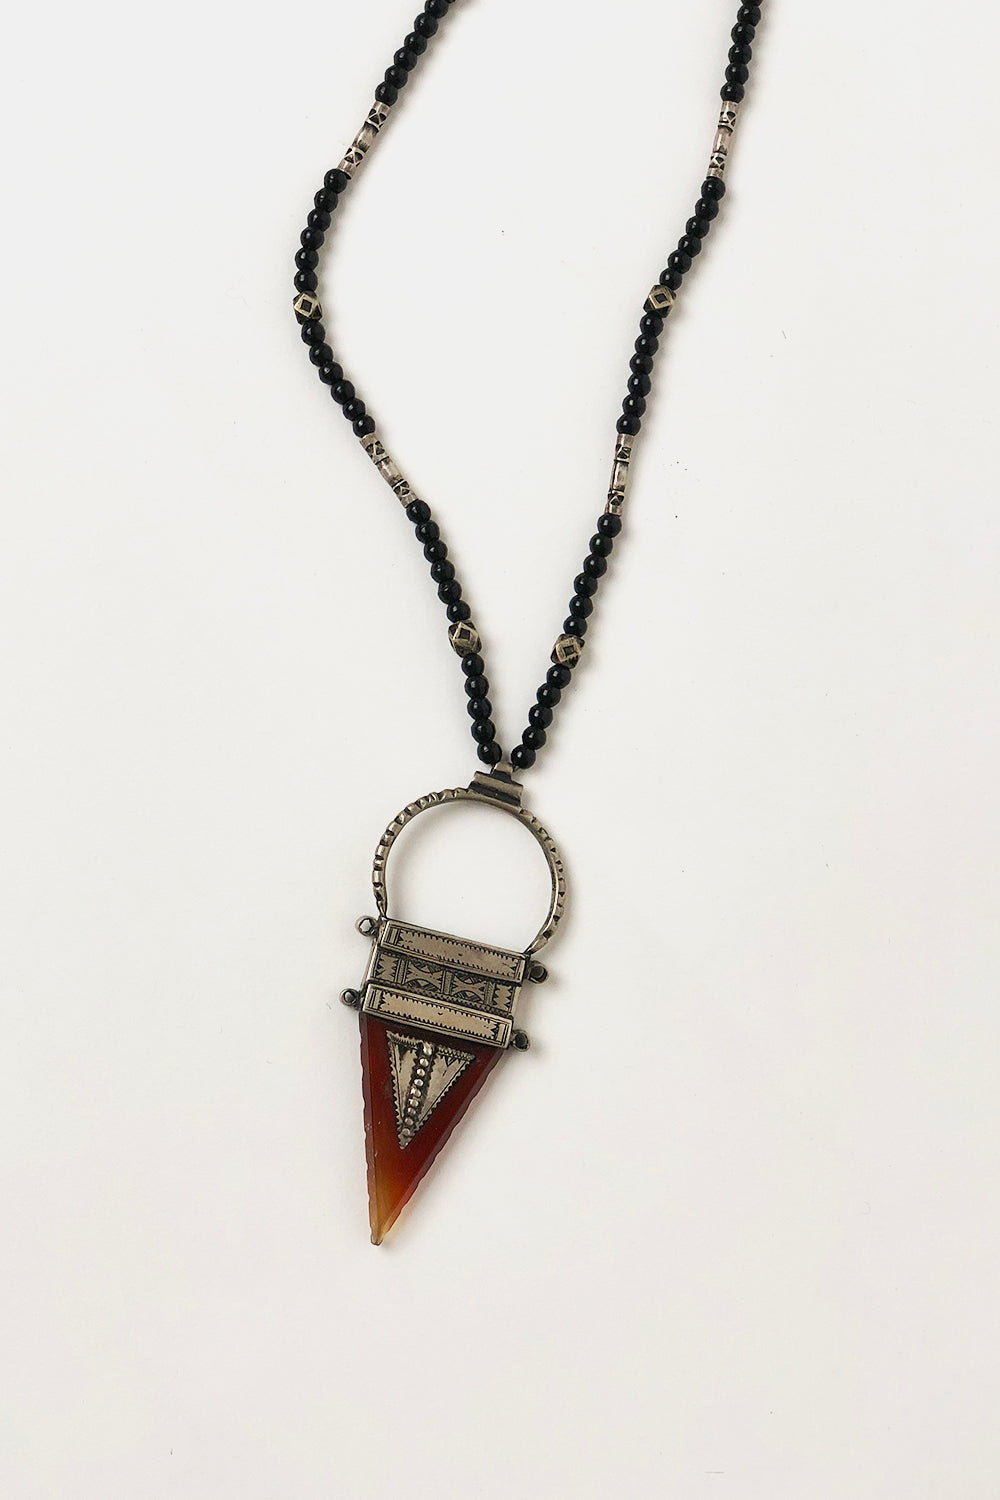 Vintage Black Glass and Carnelian Necklace